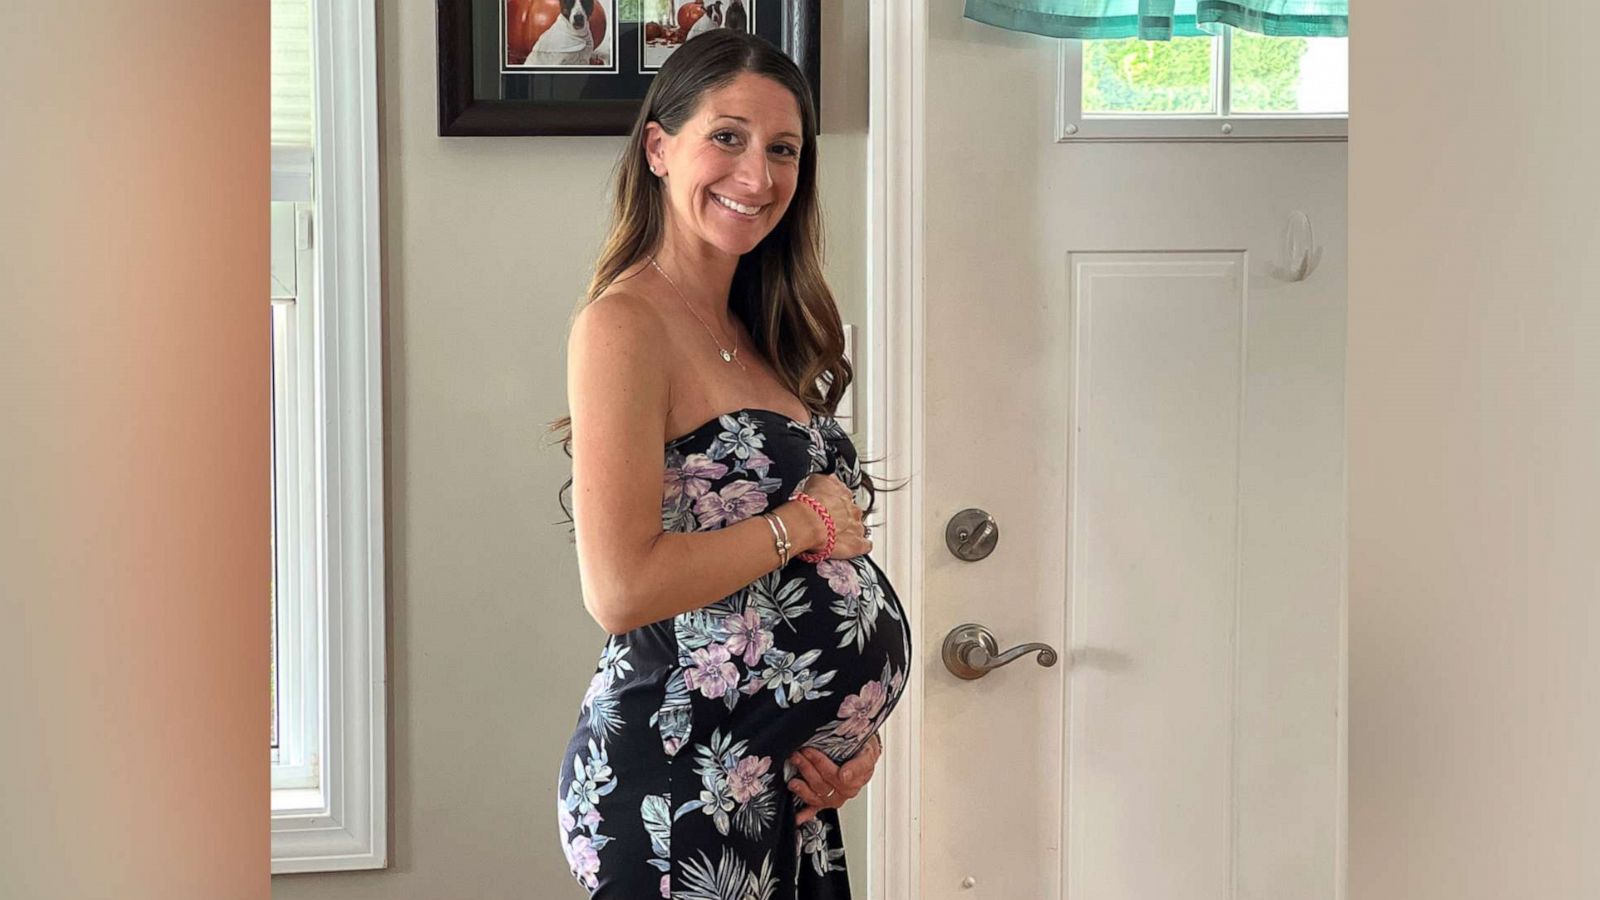 Second Trimester with Twins, LMents of Style